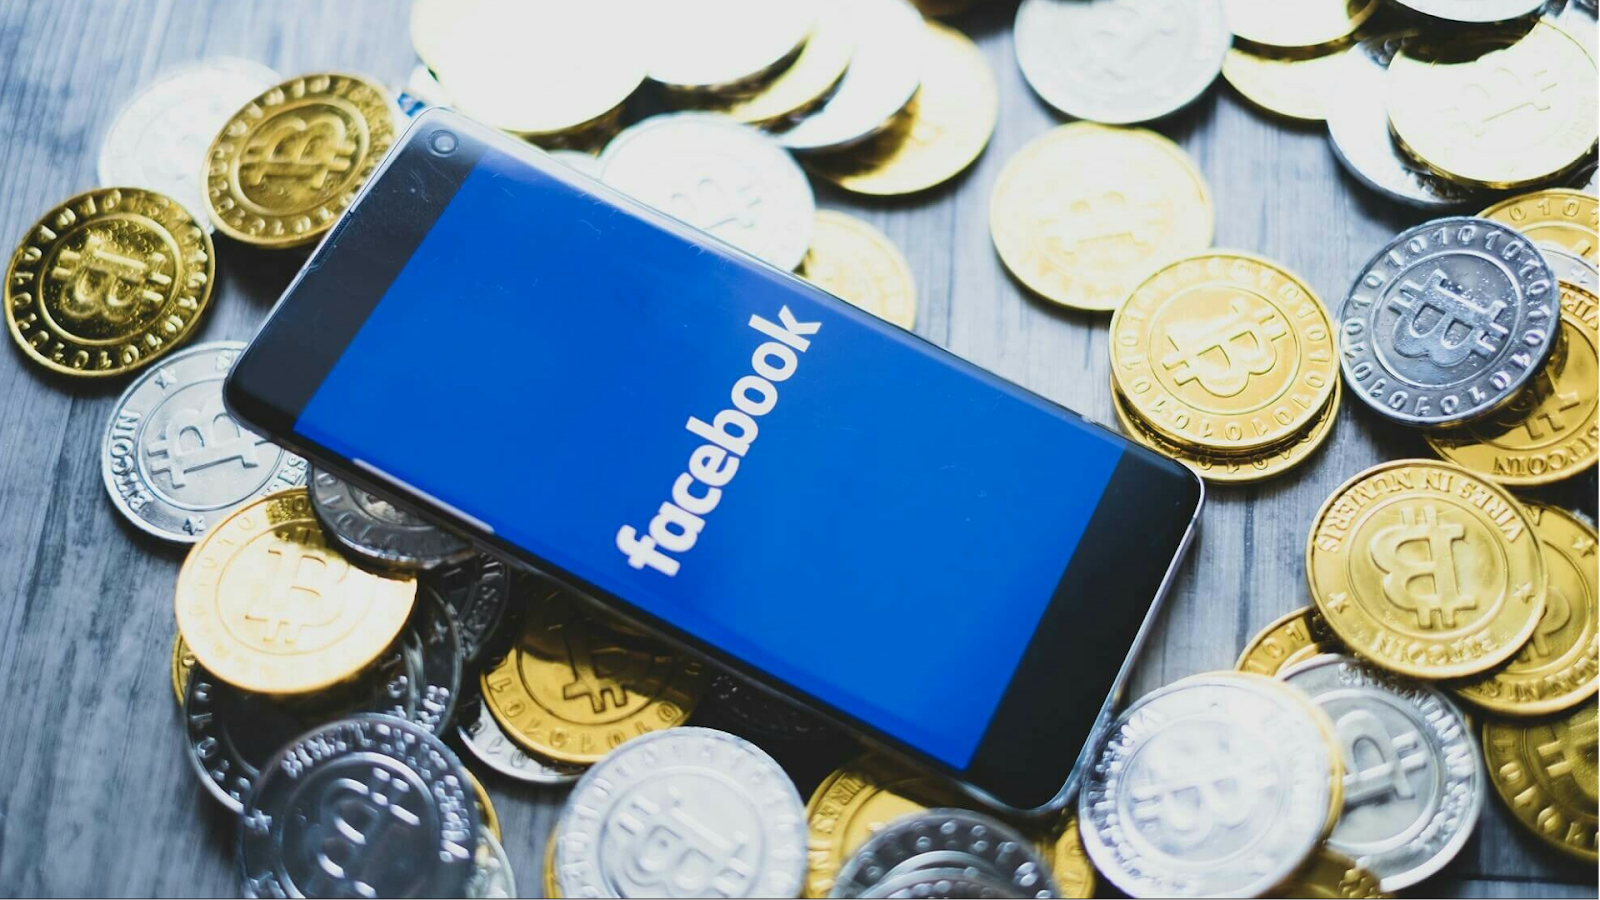 Facebook cryptocurrency Libra is coming to smuggle out ...